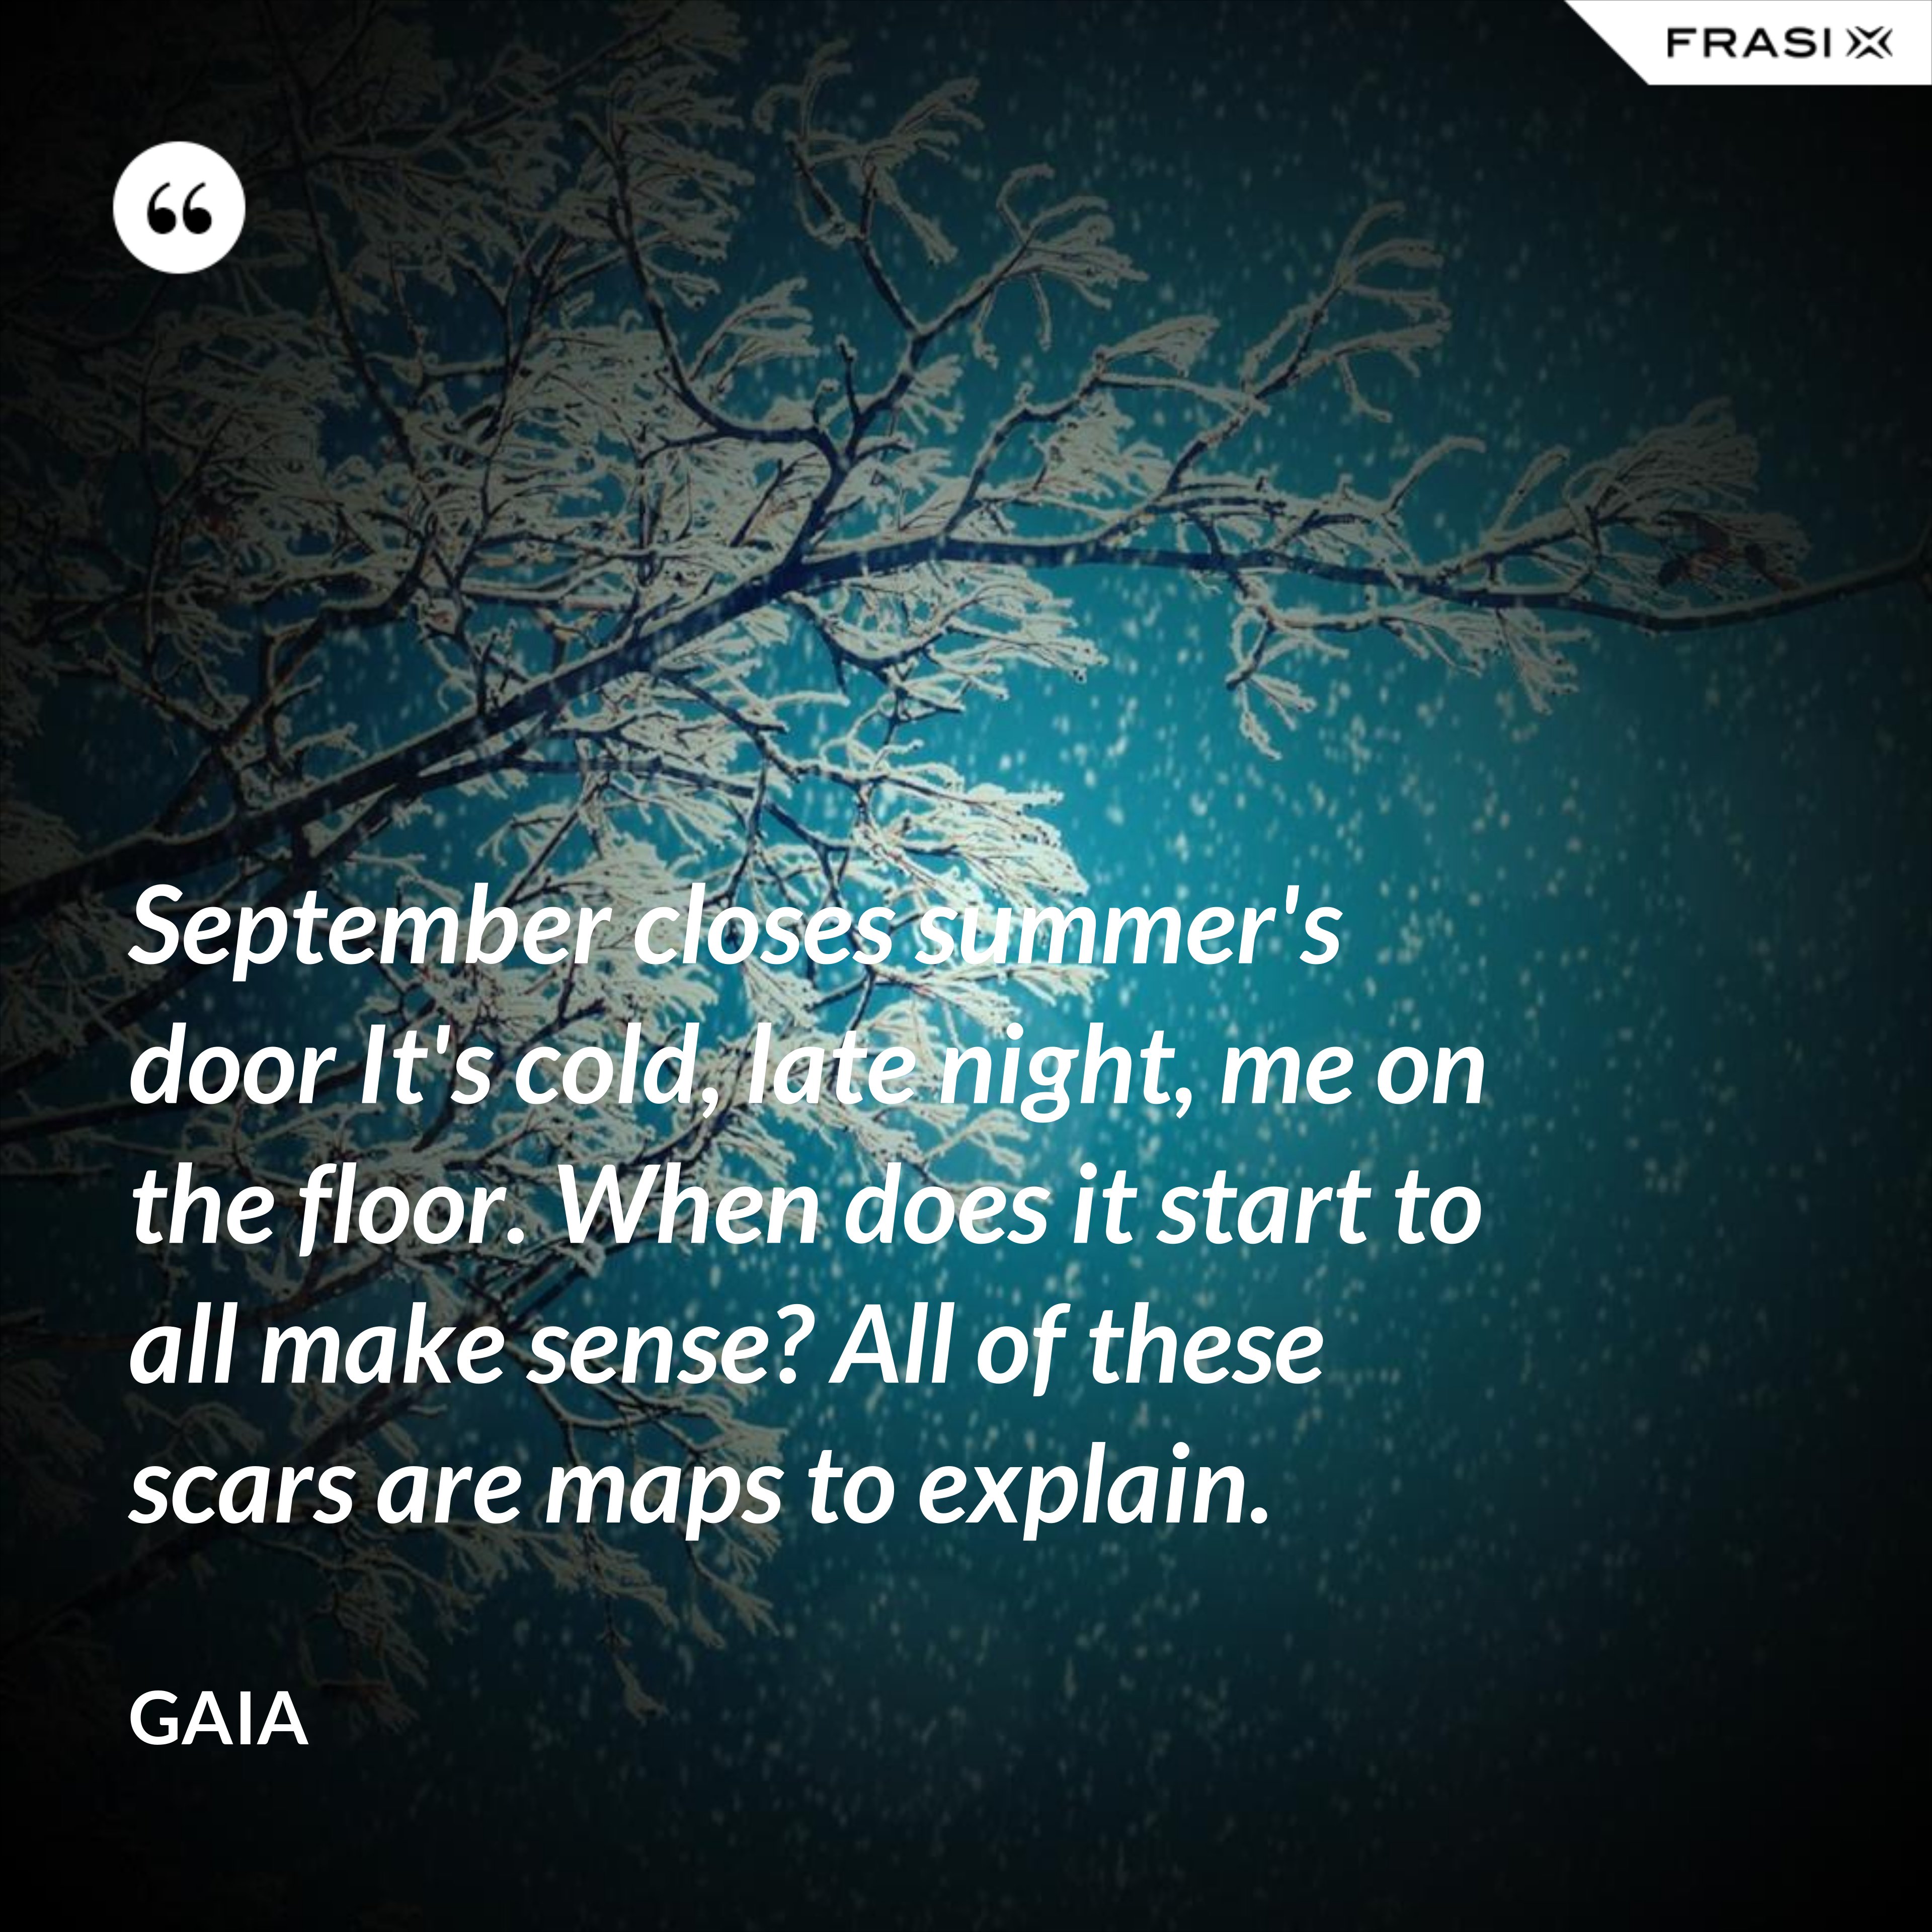 September closes summer's door It's cold, late night, me on the floor. When does it start to all make sense? All of these scars are maps to explain. - Gaia